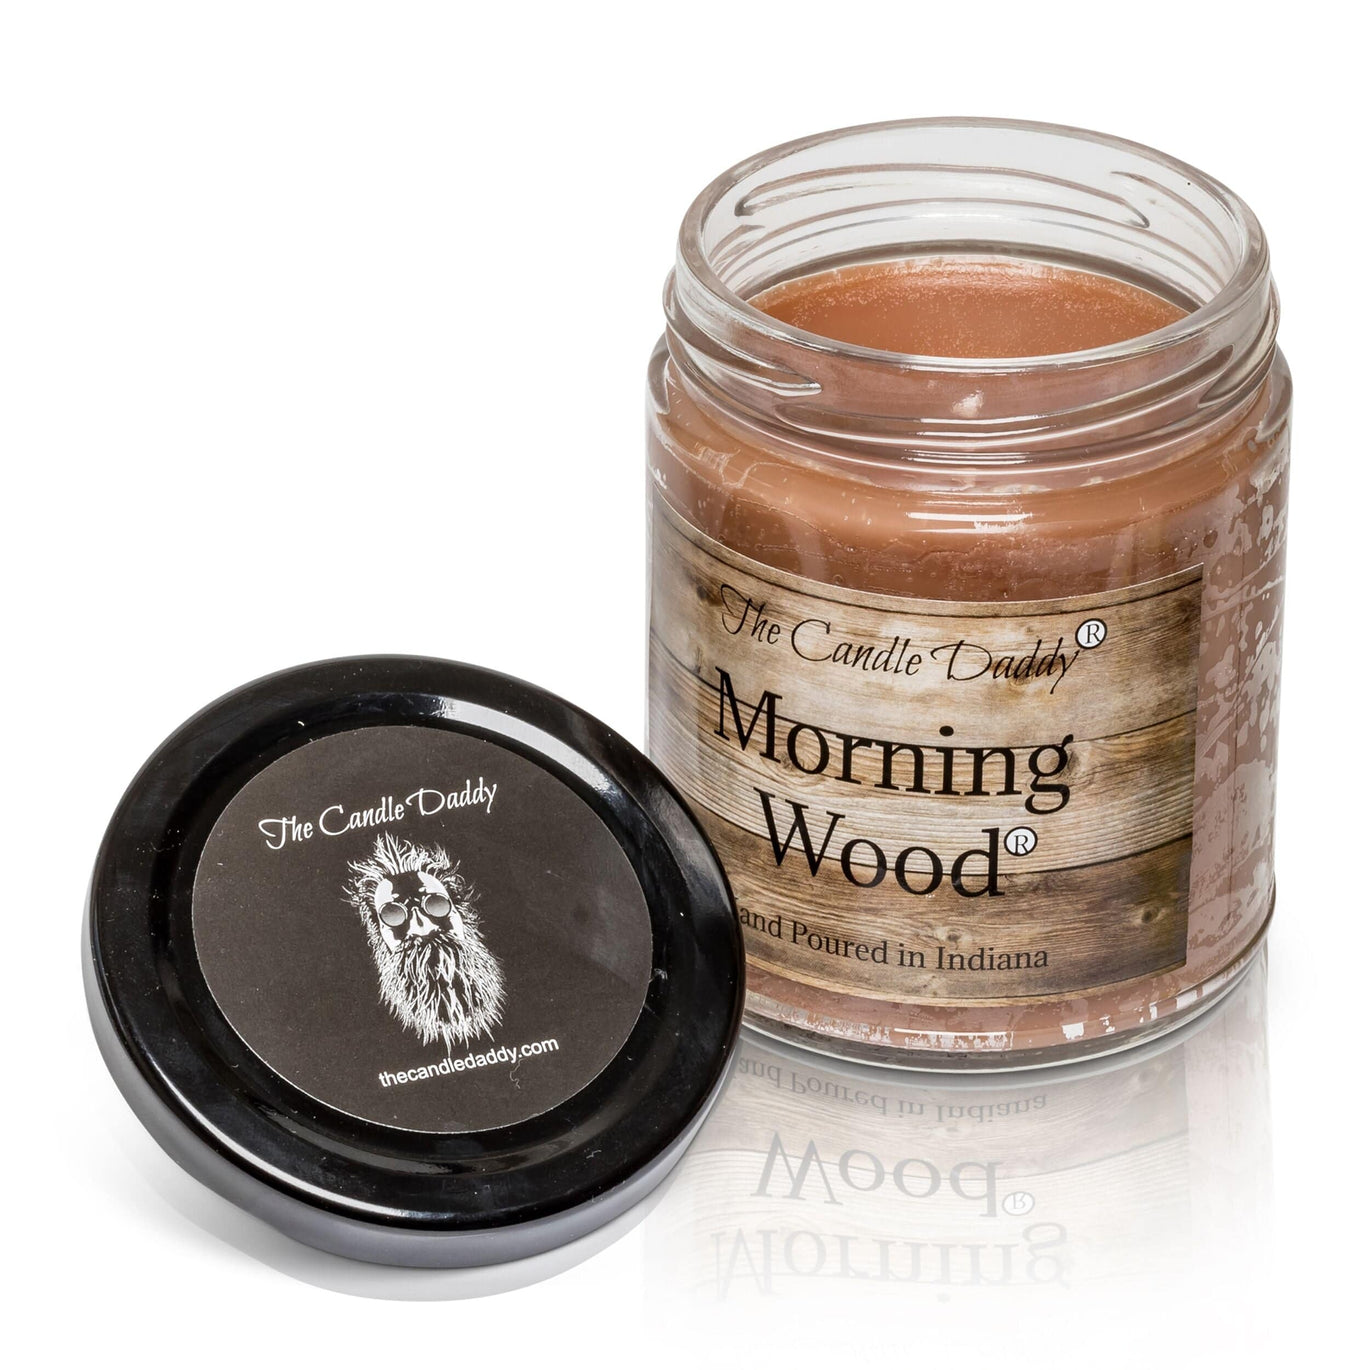 Morning Wood Candle - Heavy Wood Scent- Cedarwood Vanilla Scent 6 Ounce - 40 Hour Burn.